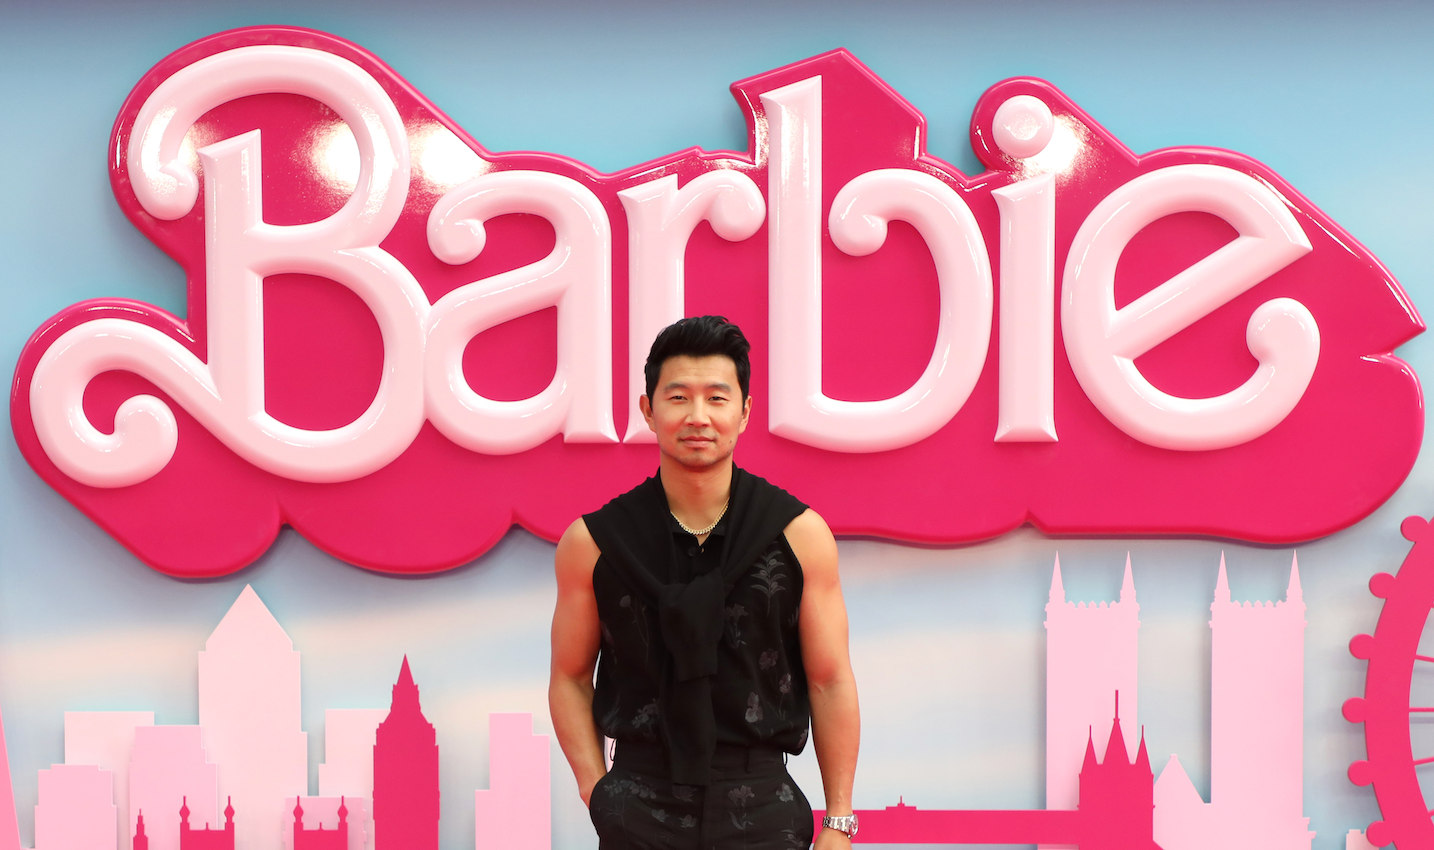 Simu Liu waxed body for 'Barbie': 'One of the most painful experiences